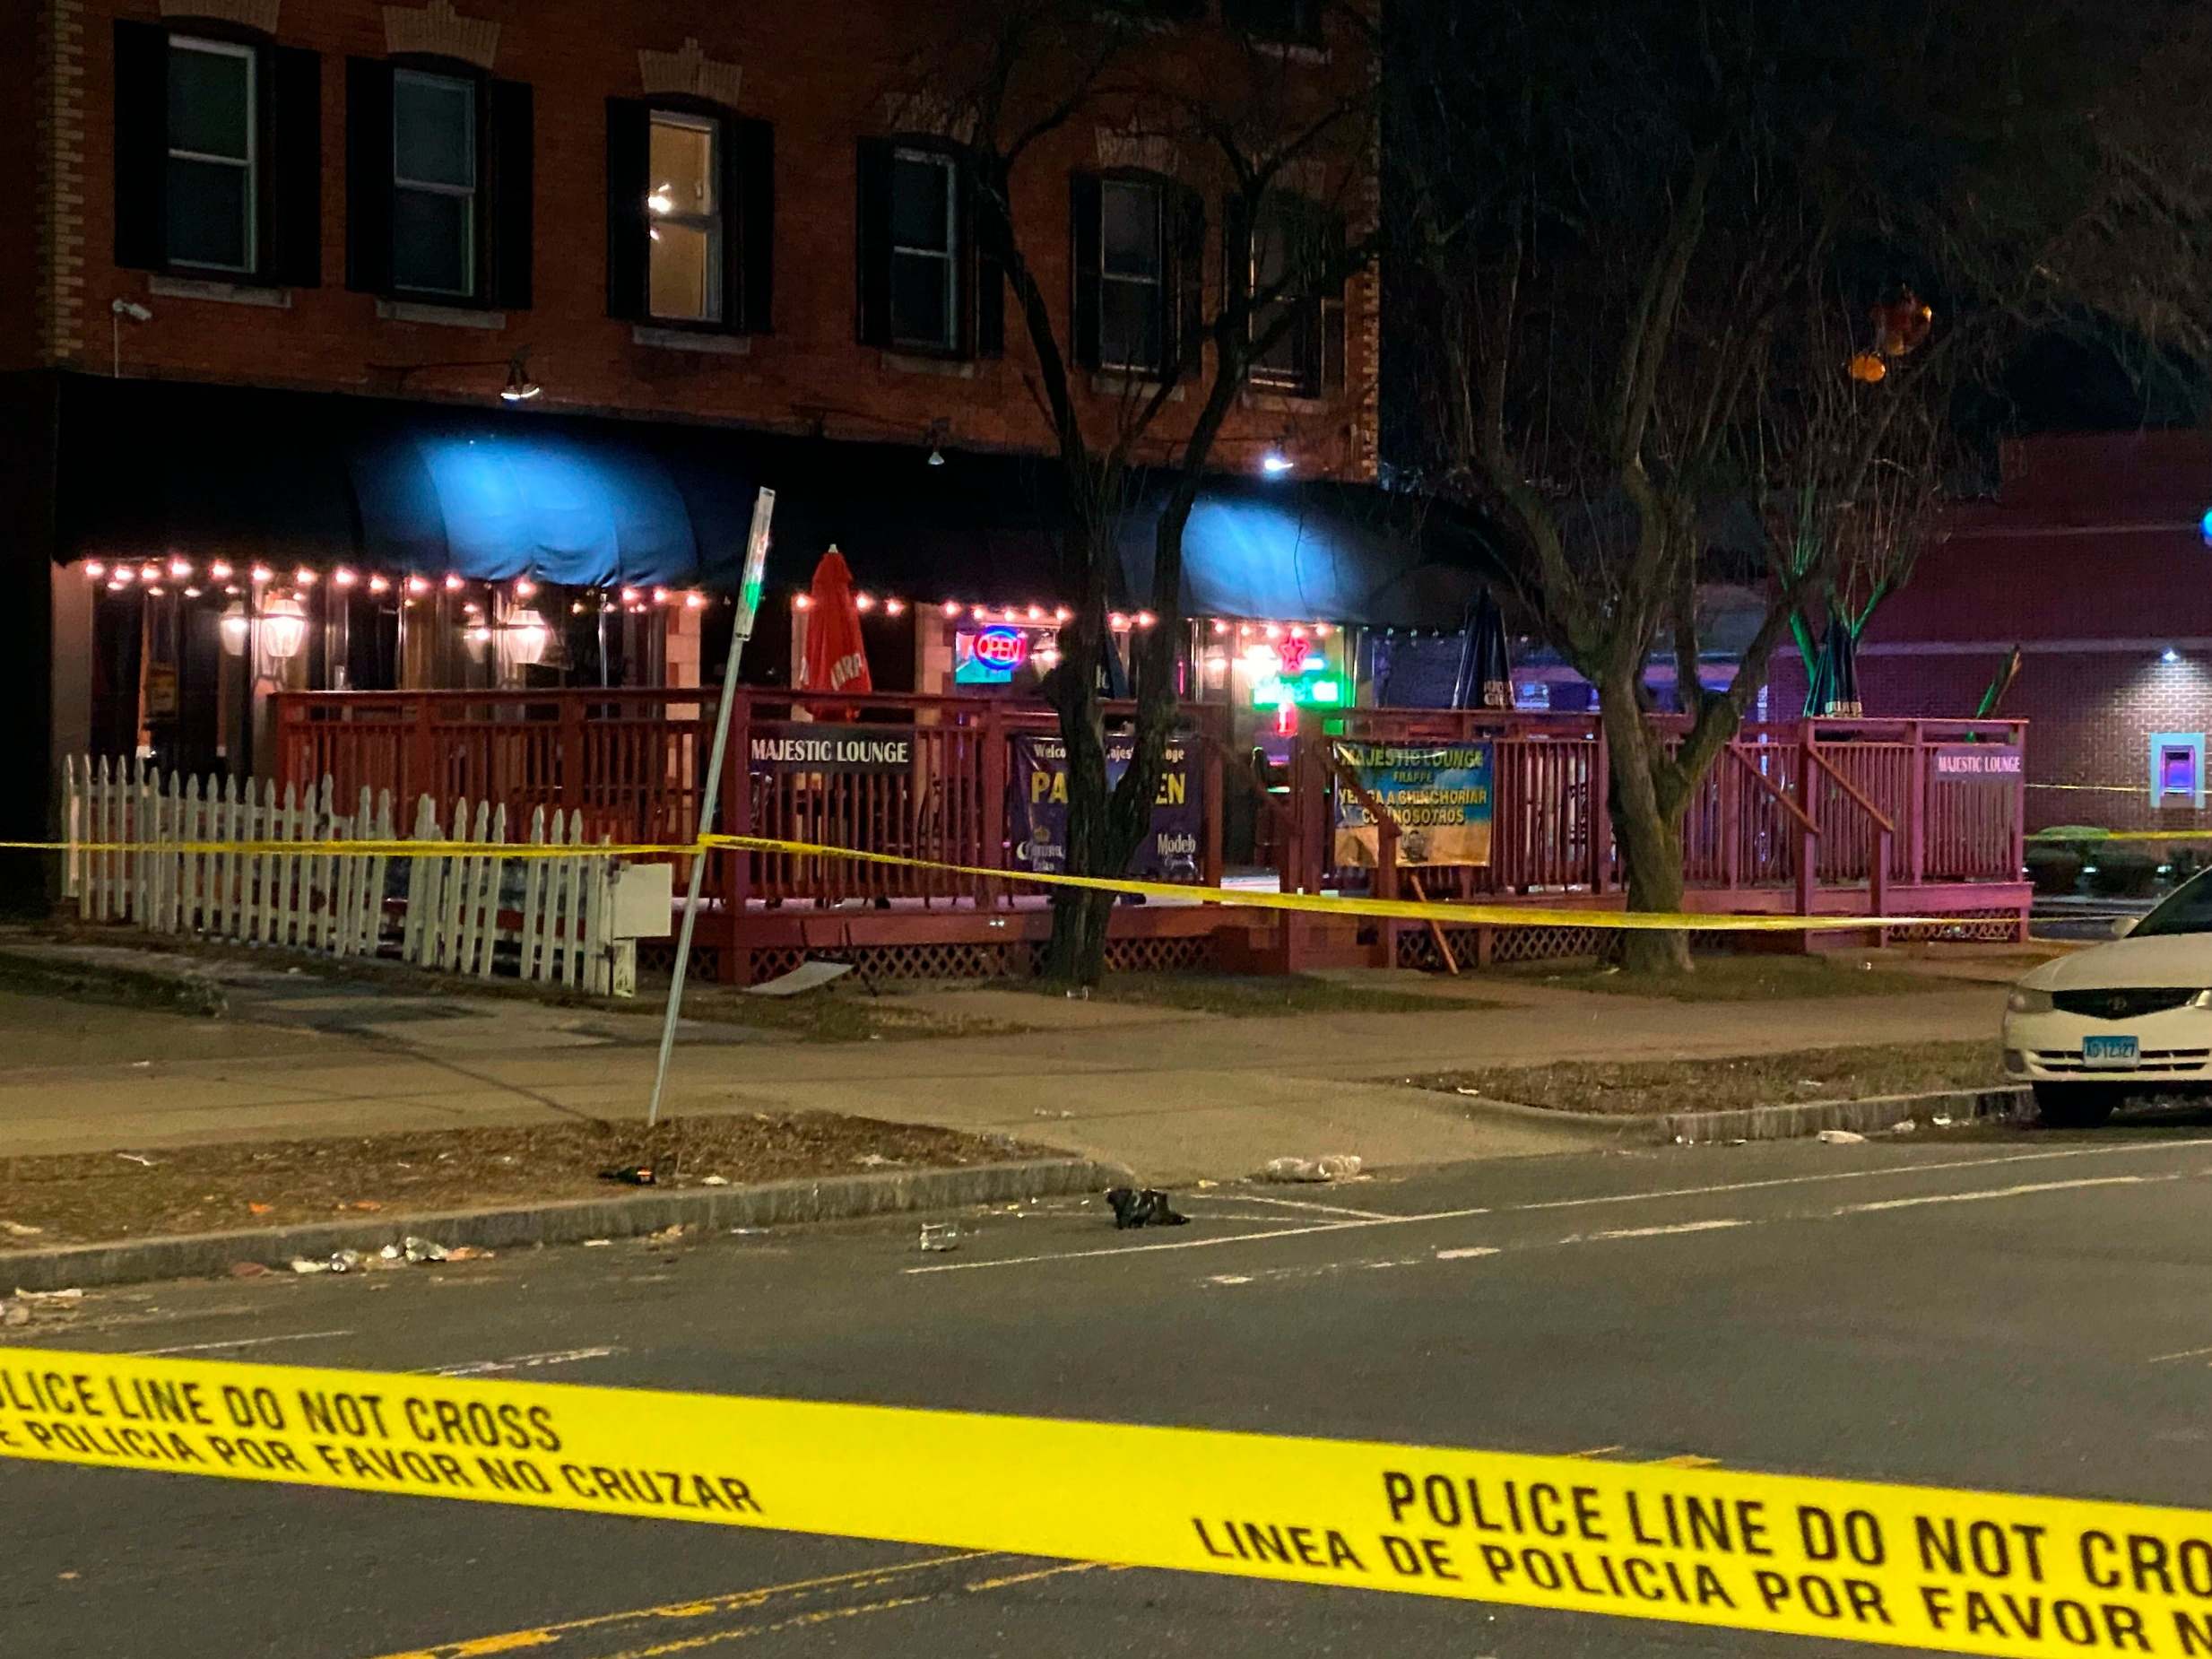 There are multiple victims after a shooting at Majestic Lounge in Hartford, Connecticut, police say